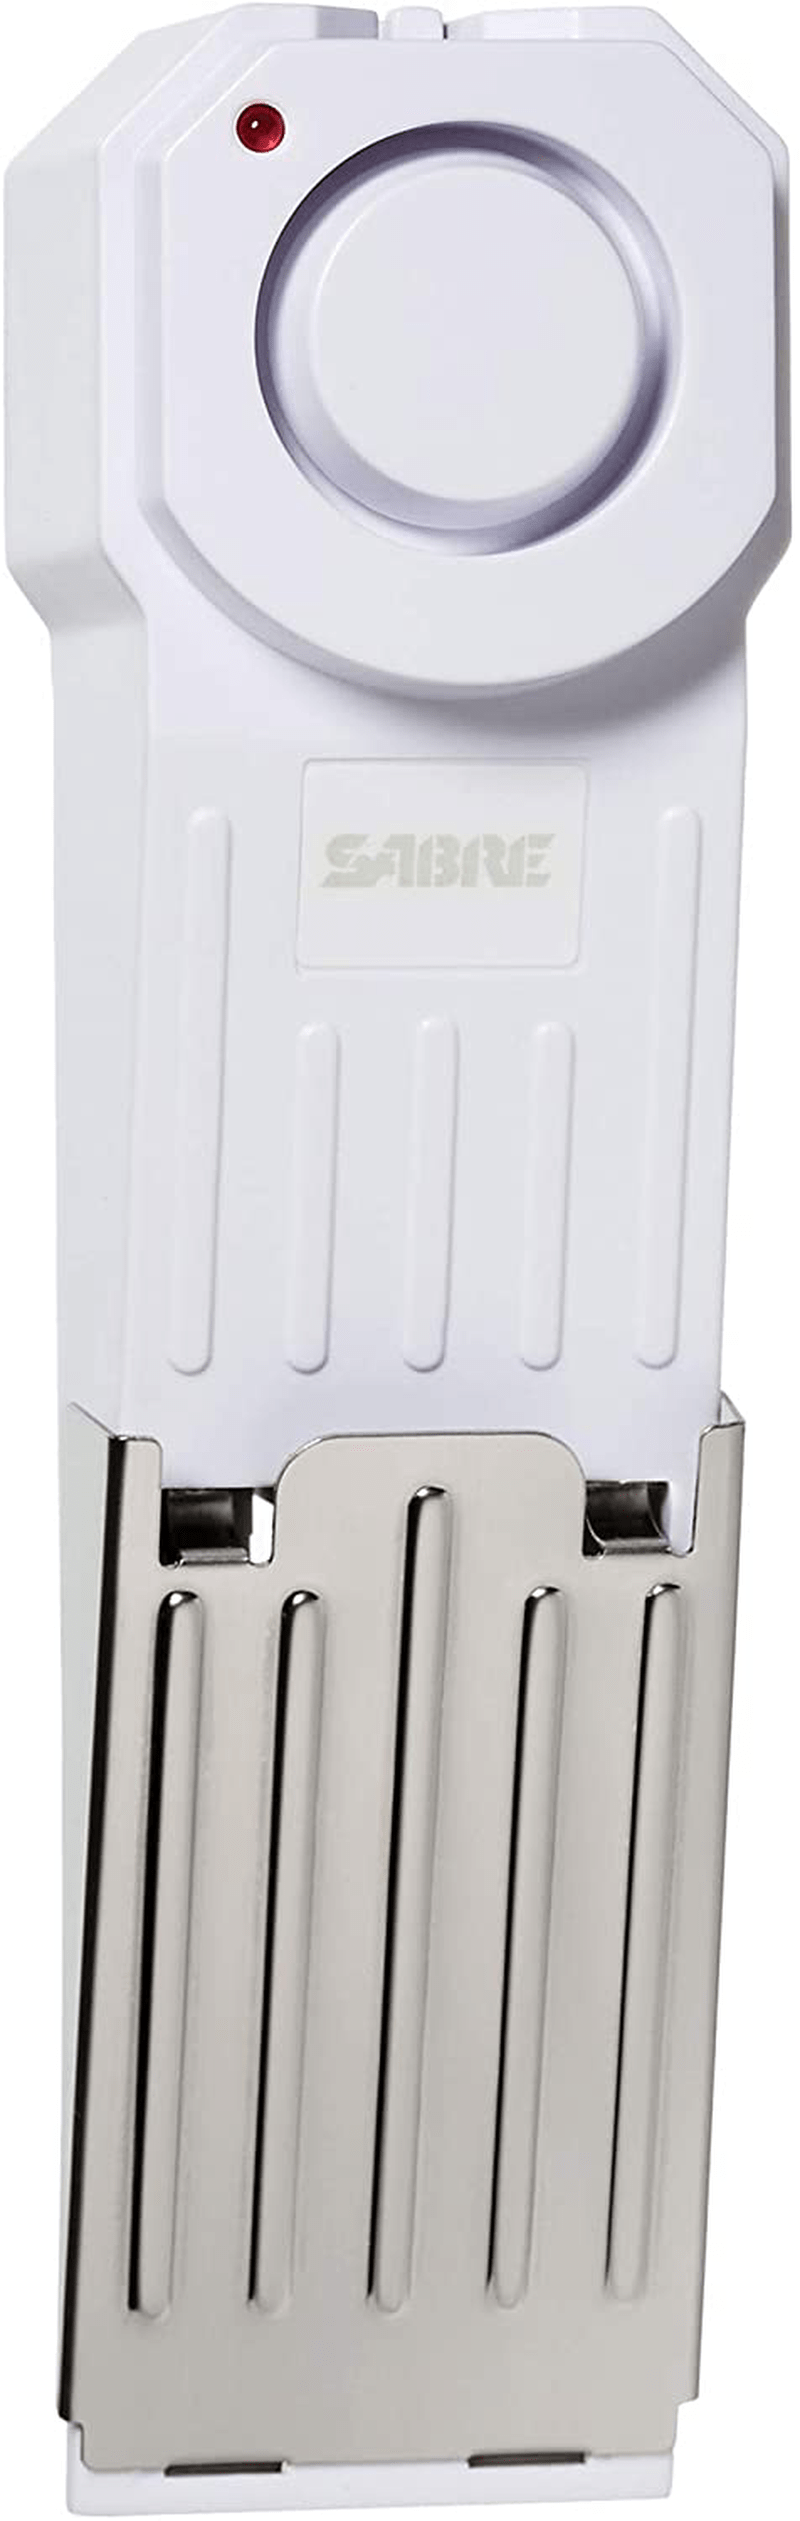 SABRE HS-DSA Wedge Door Stop Security Alarm with 120 dB Siren --- Great for Home, Travel, Apartment or Dorm